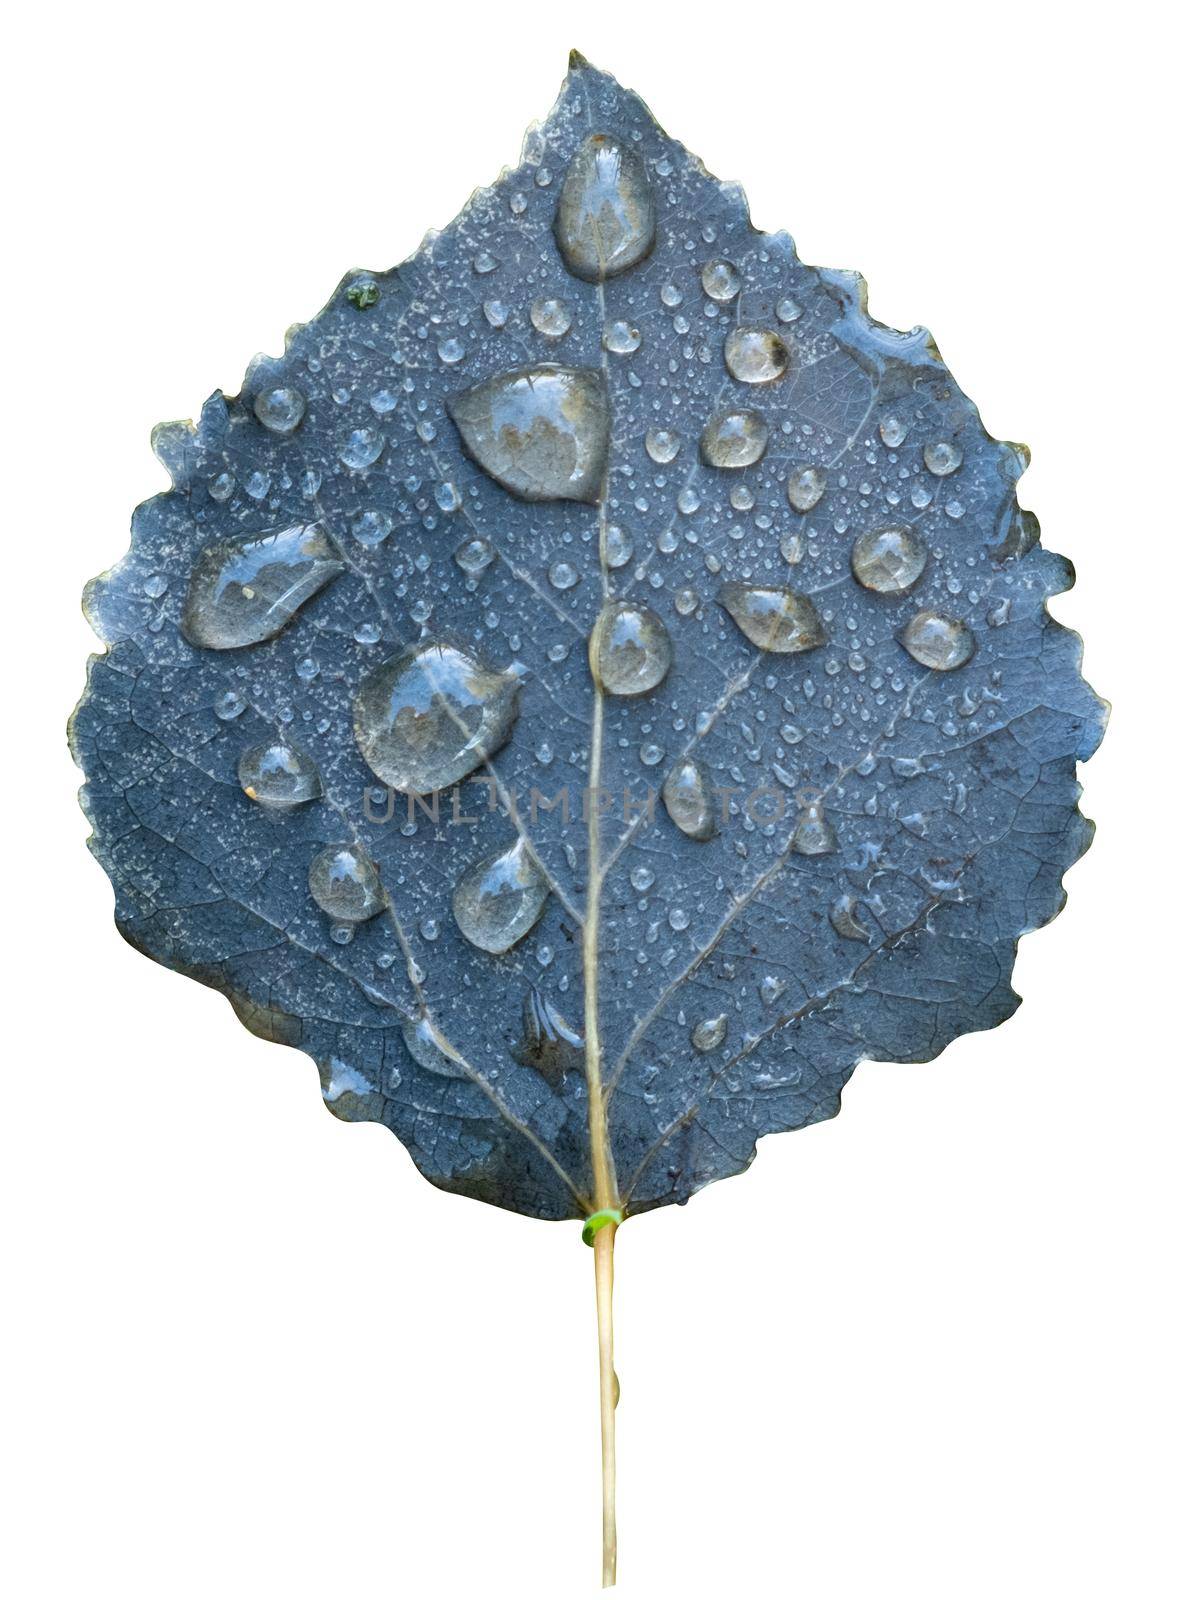 Isolated Leaf With Water Droplets by mrdoomits